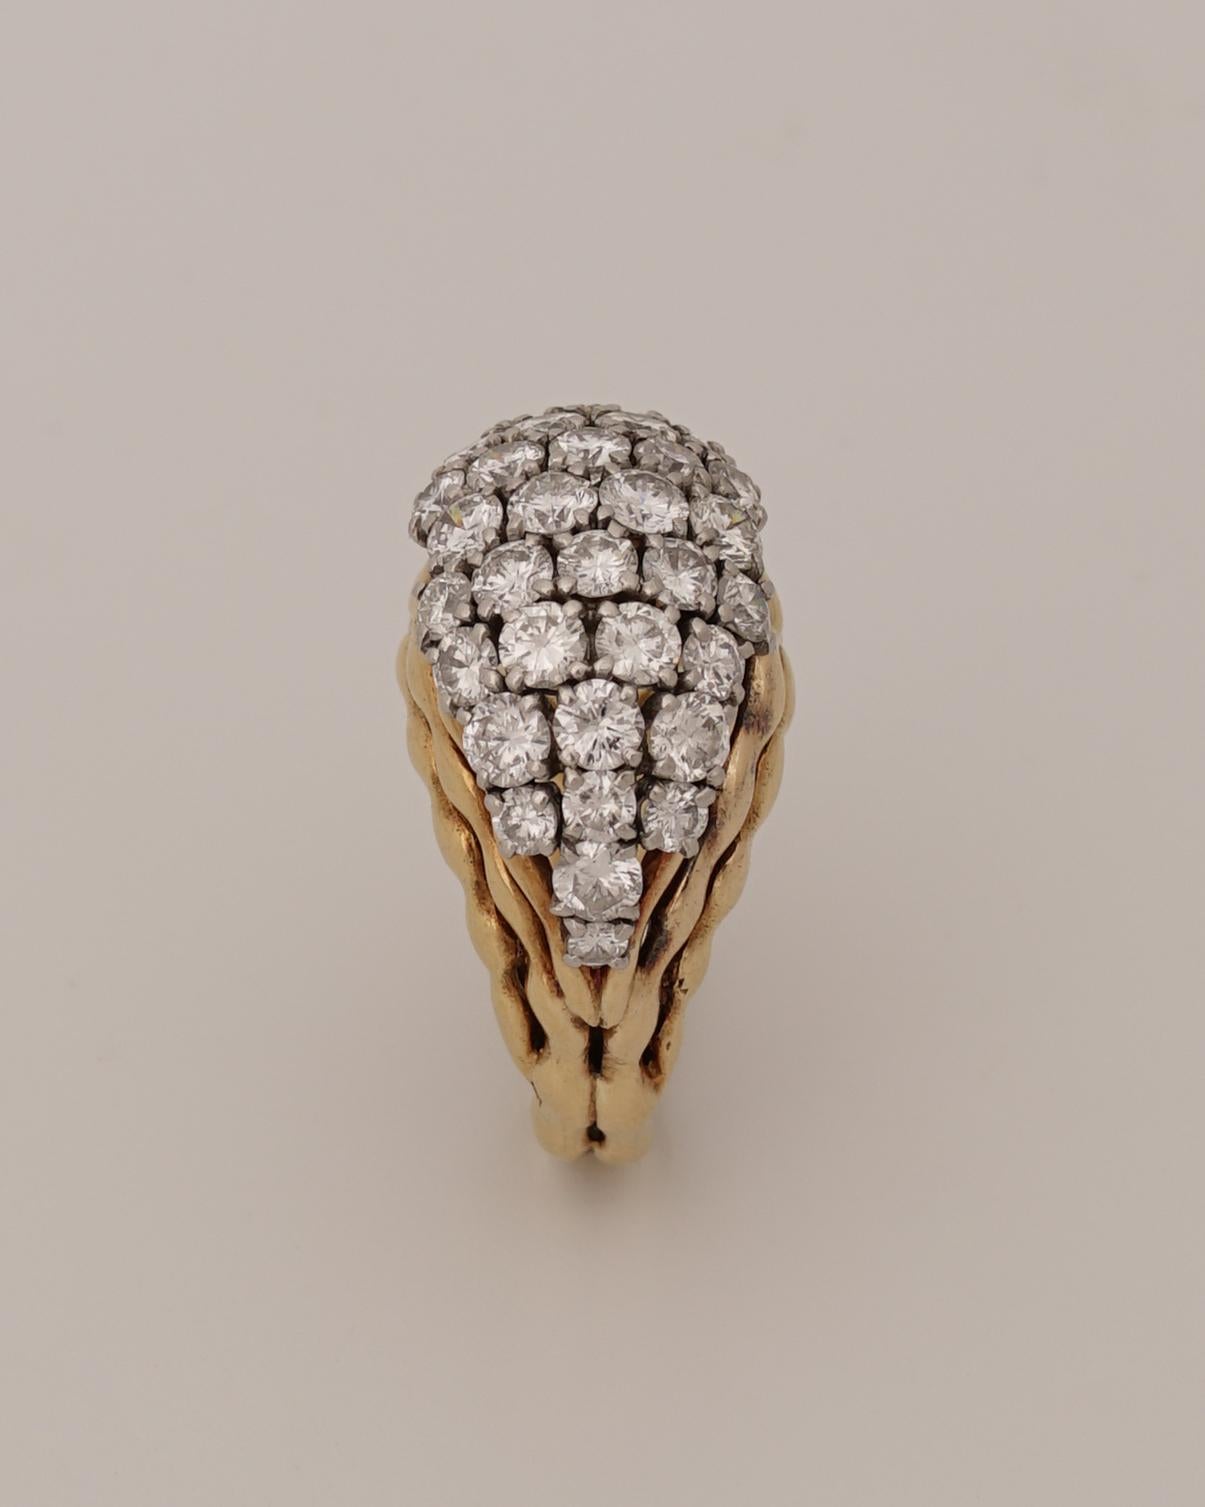 Boucheron, Paris
Stunning Diamond and 18k Gold ring, Circa 1970
Of Wave design, the ring is heavy in hand and wears a incredible diamond architectural setting.
The bombé form is set in platinum with 38 brilliant-cut diamonds (G-VVS) between gold